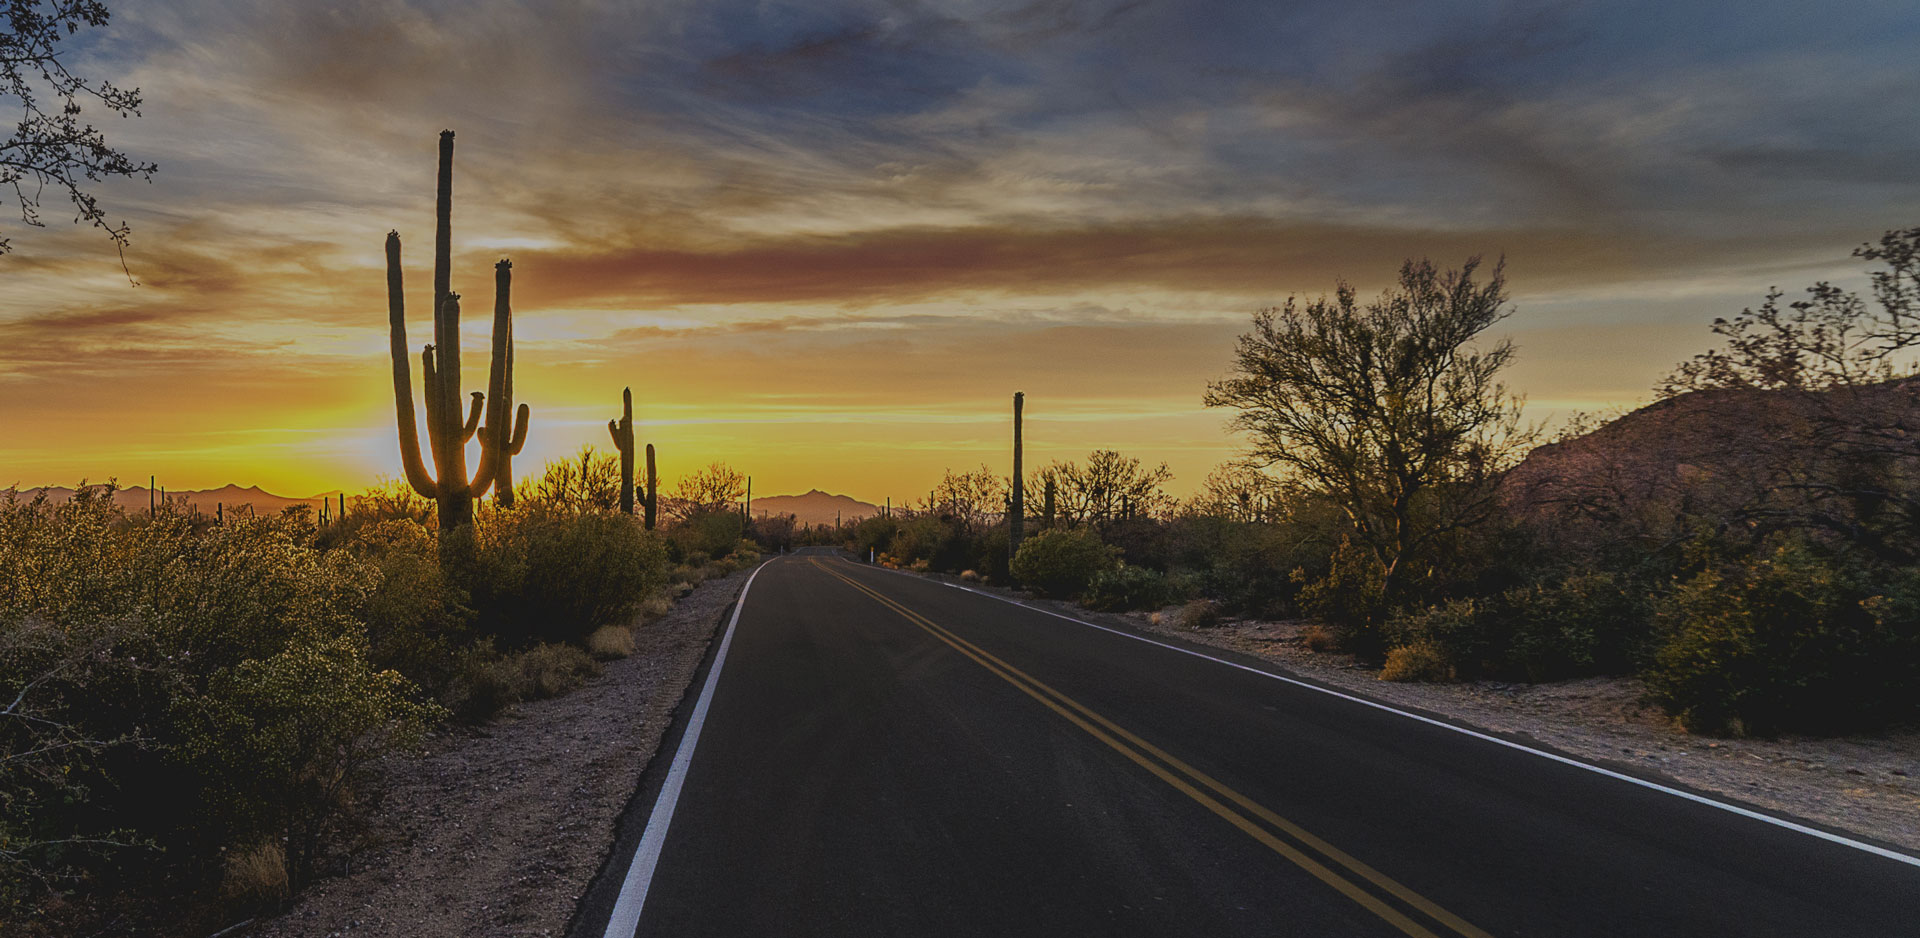 Road extends to the horizon, surrounded by Arizona desert, with sunset in the distance